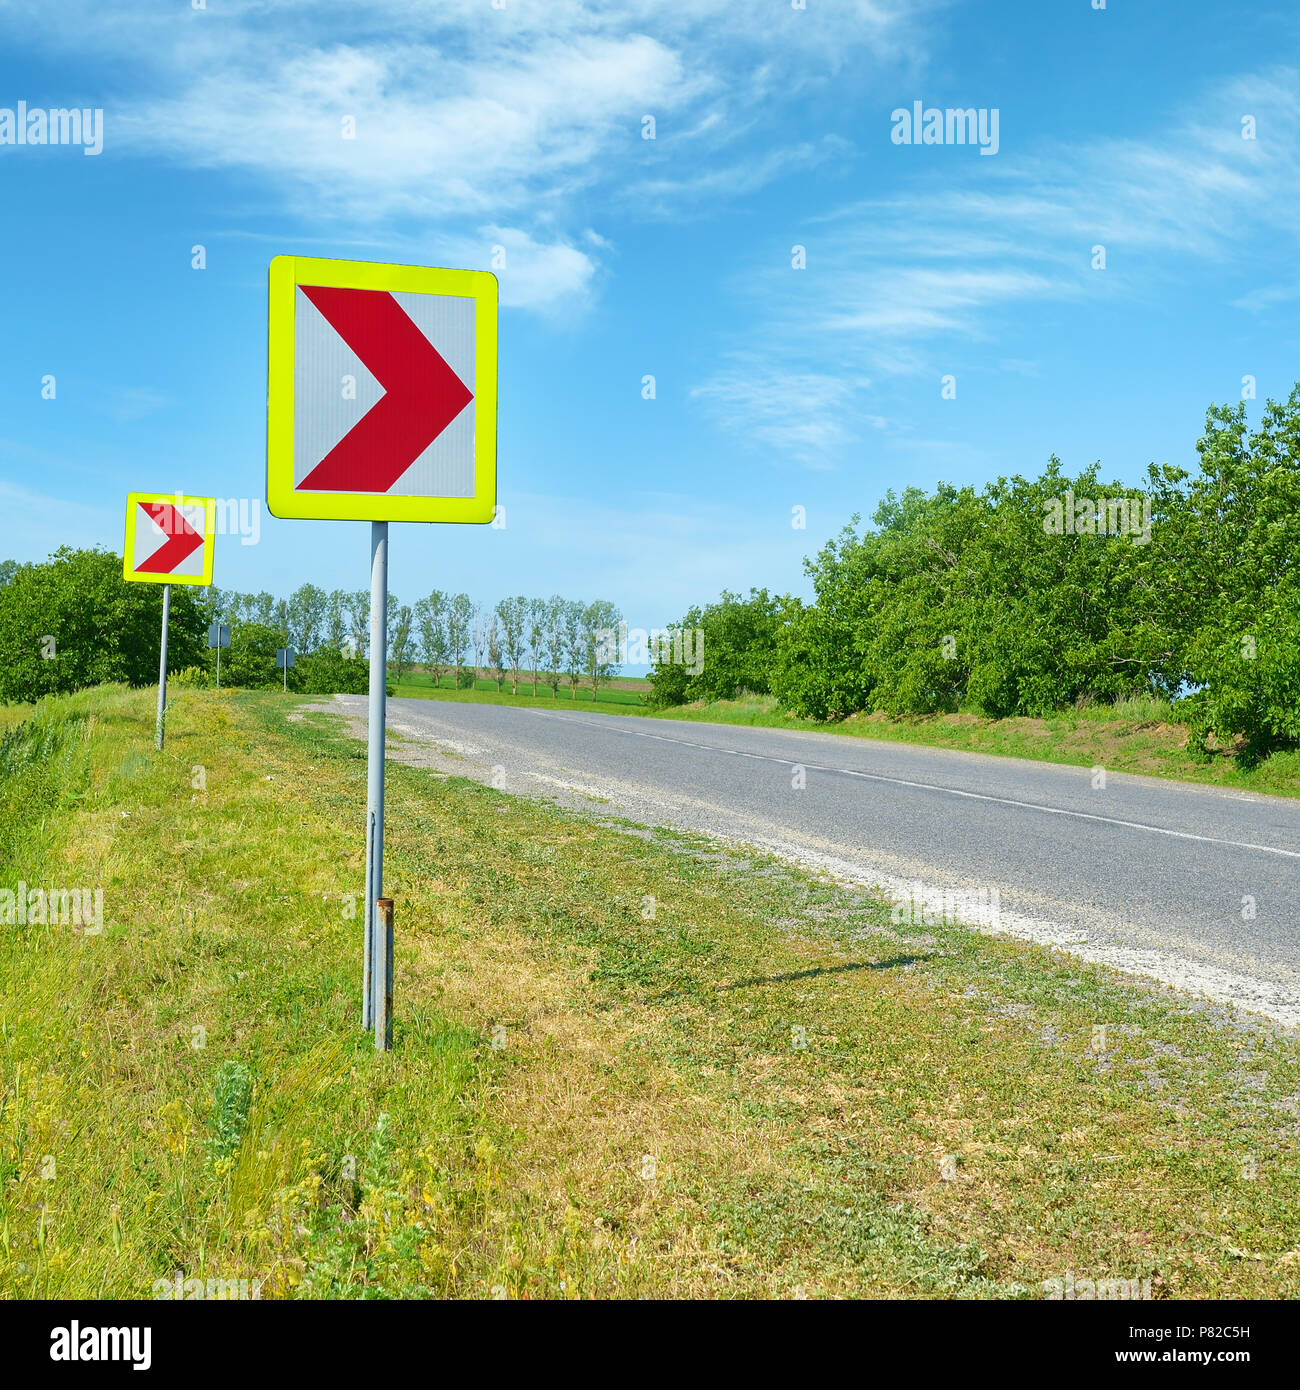 Warning signs for dangerous turn to right on country road. Stock Photo